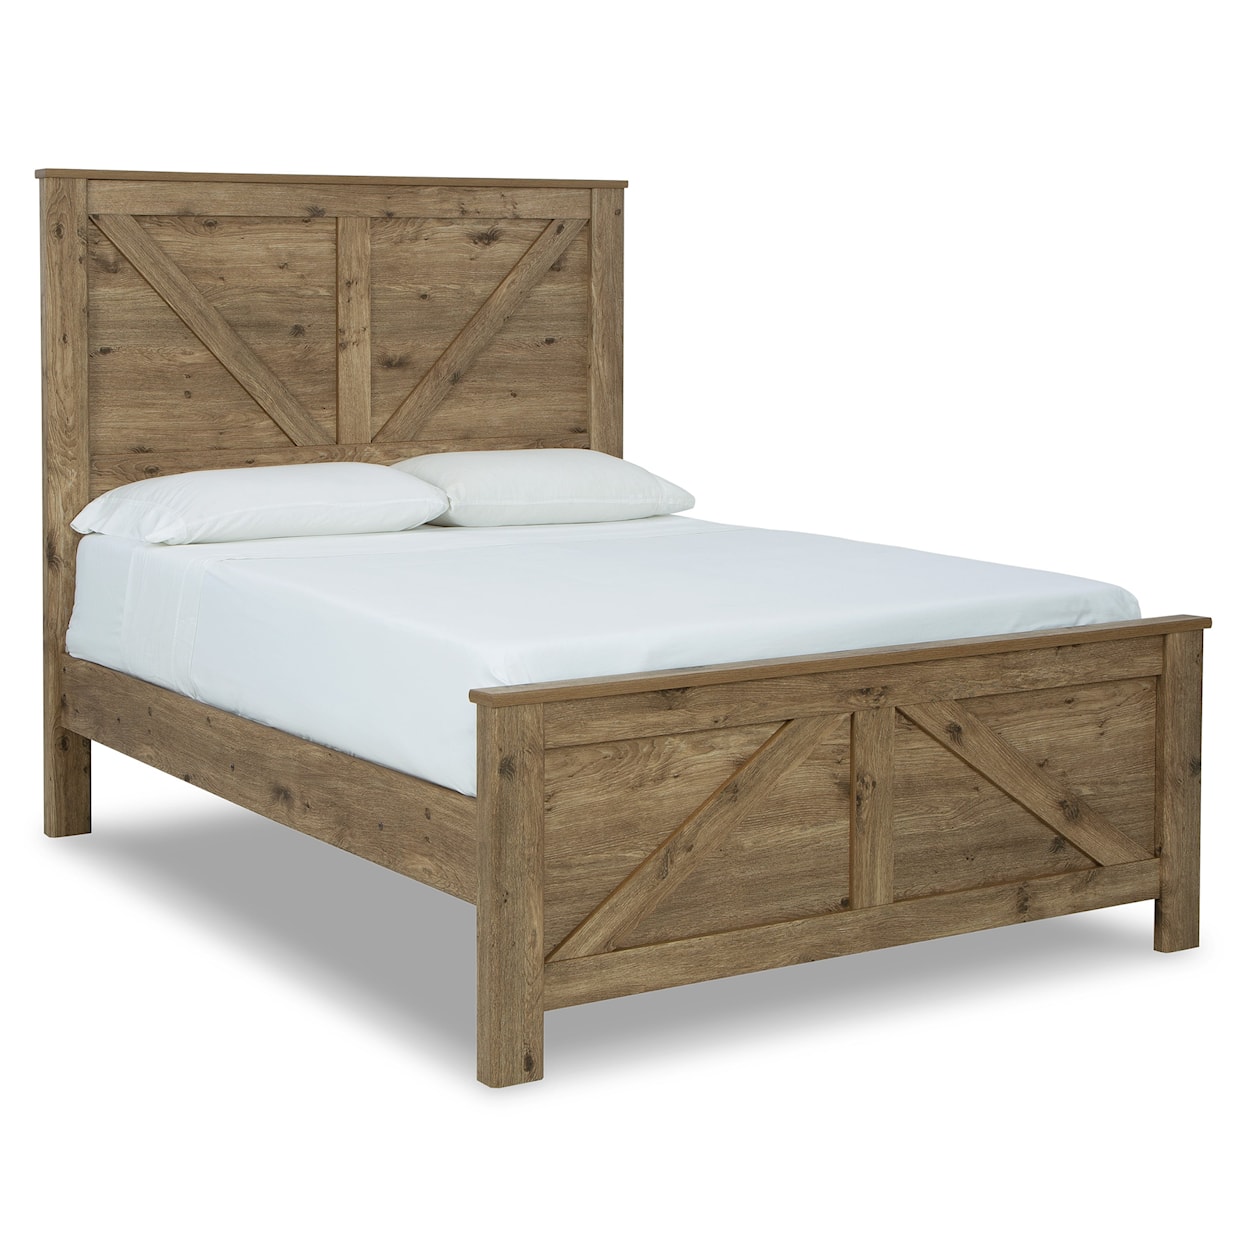 Signature Design by Ashley Shurlee Queen Crossbuck Panel Bed